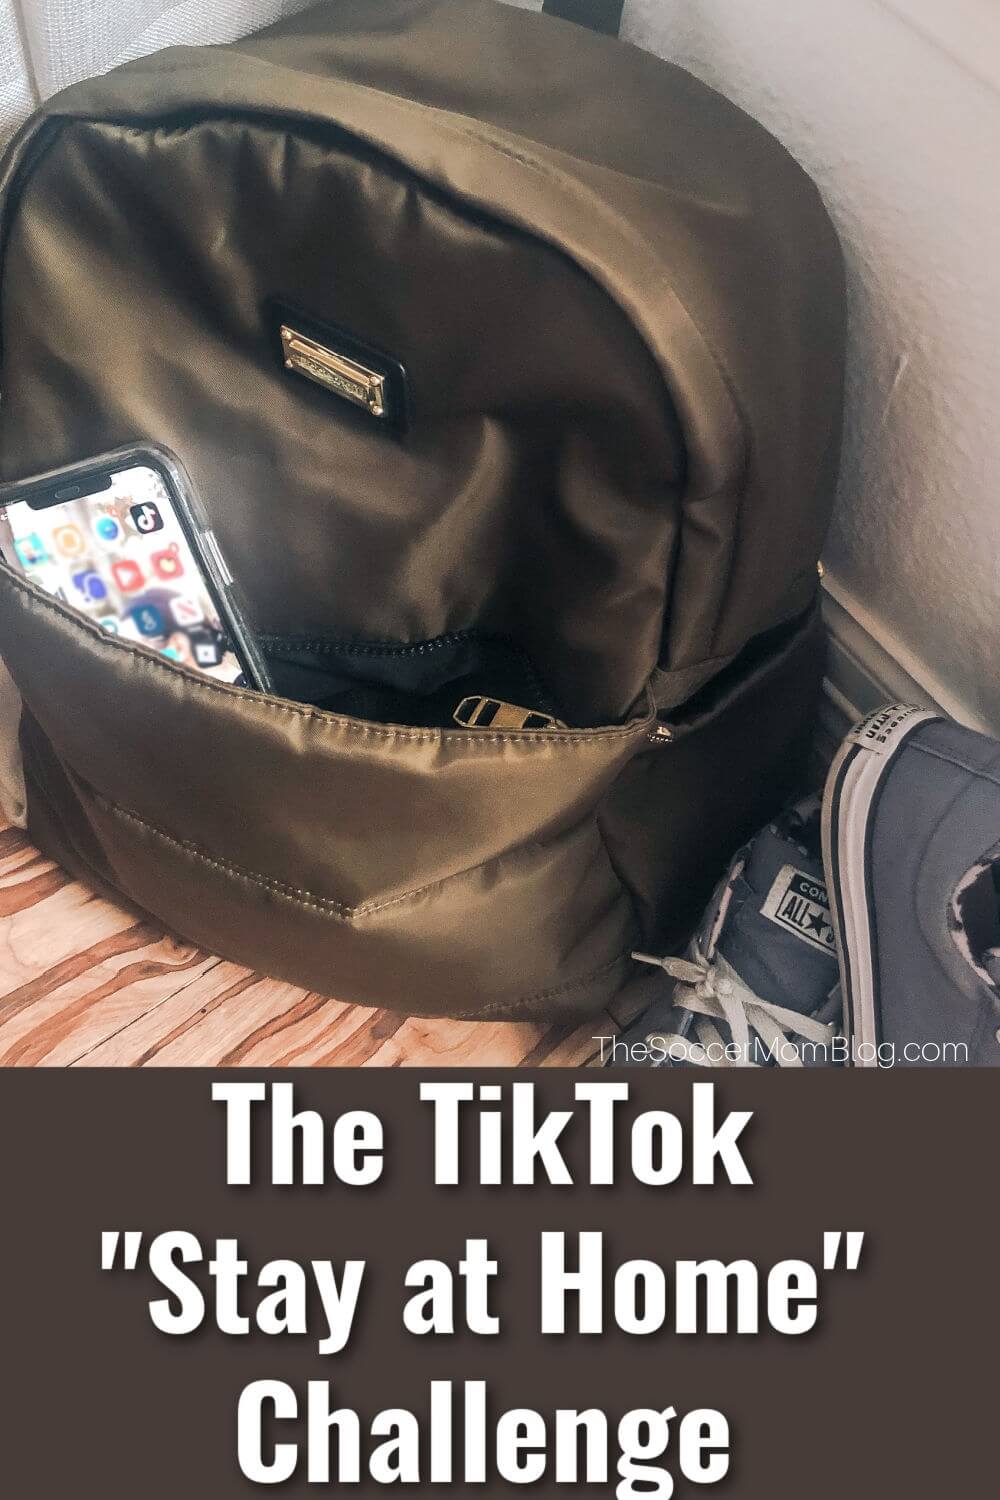 backpack with phone sticking out of pocket